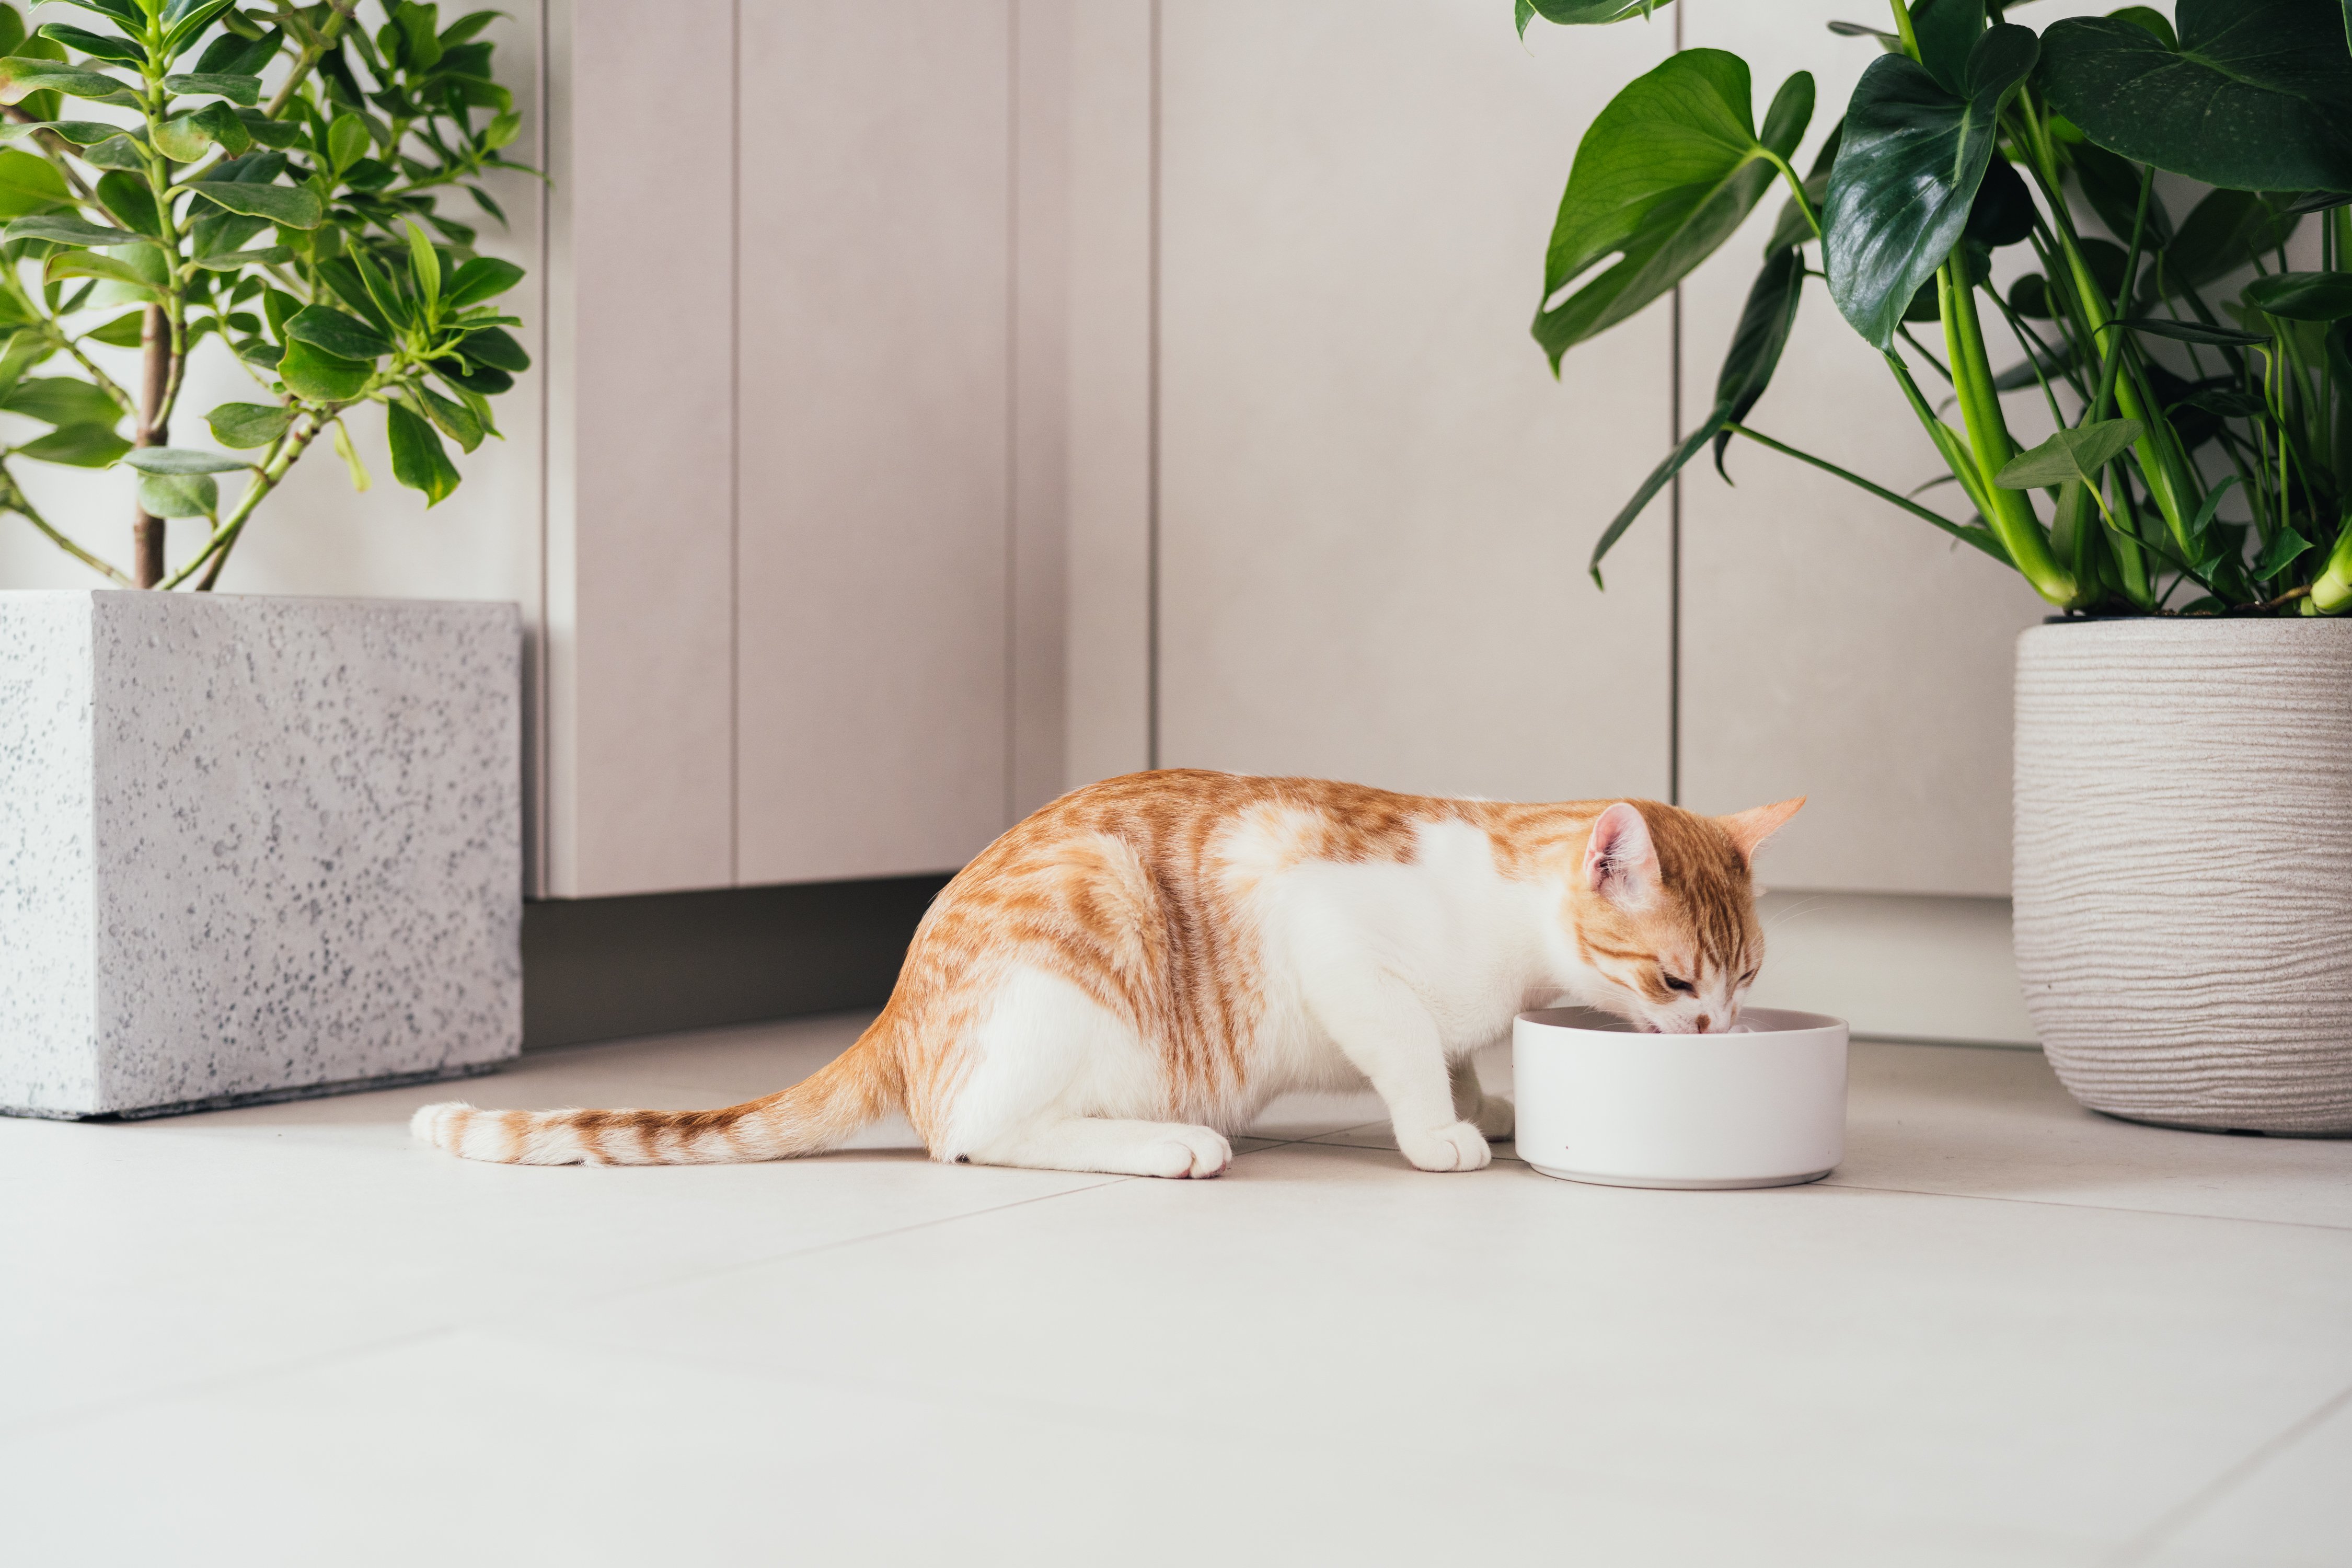 Here are some tips for the nutrition of your sterilised cat